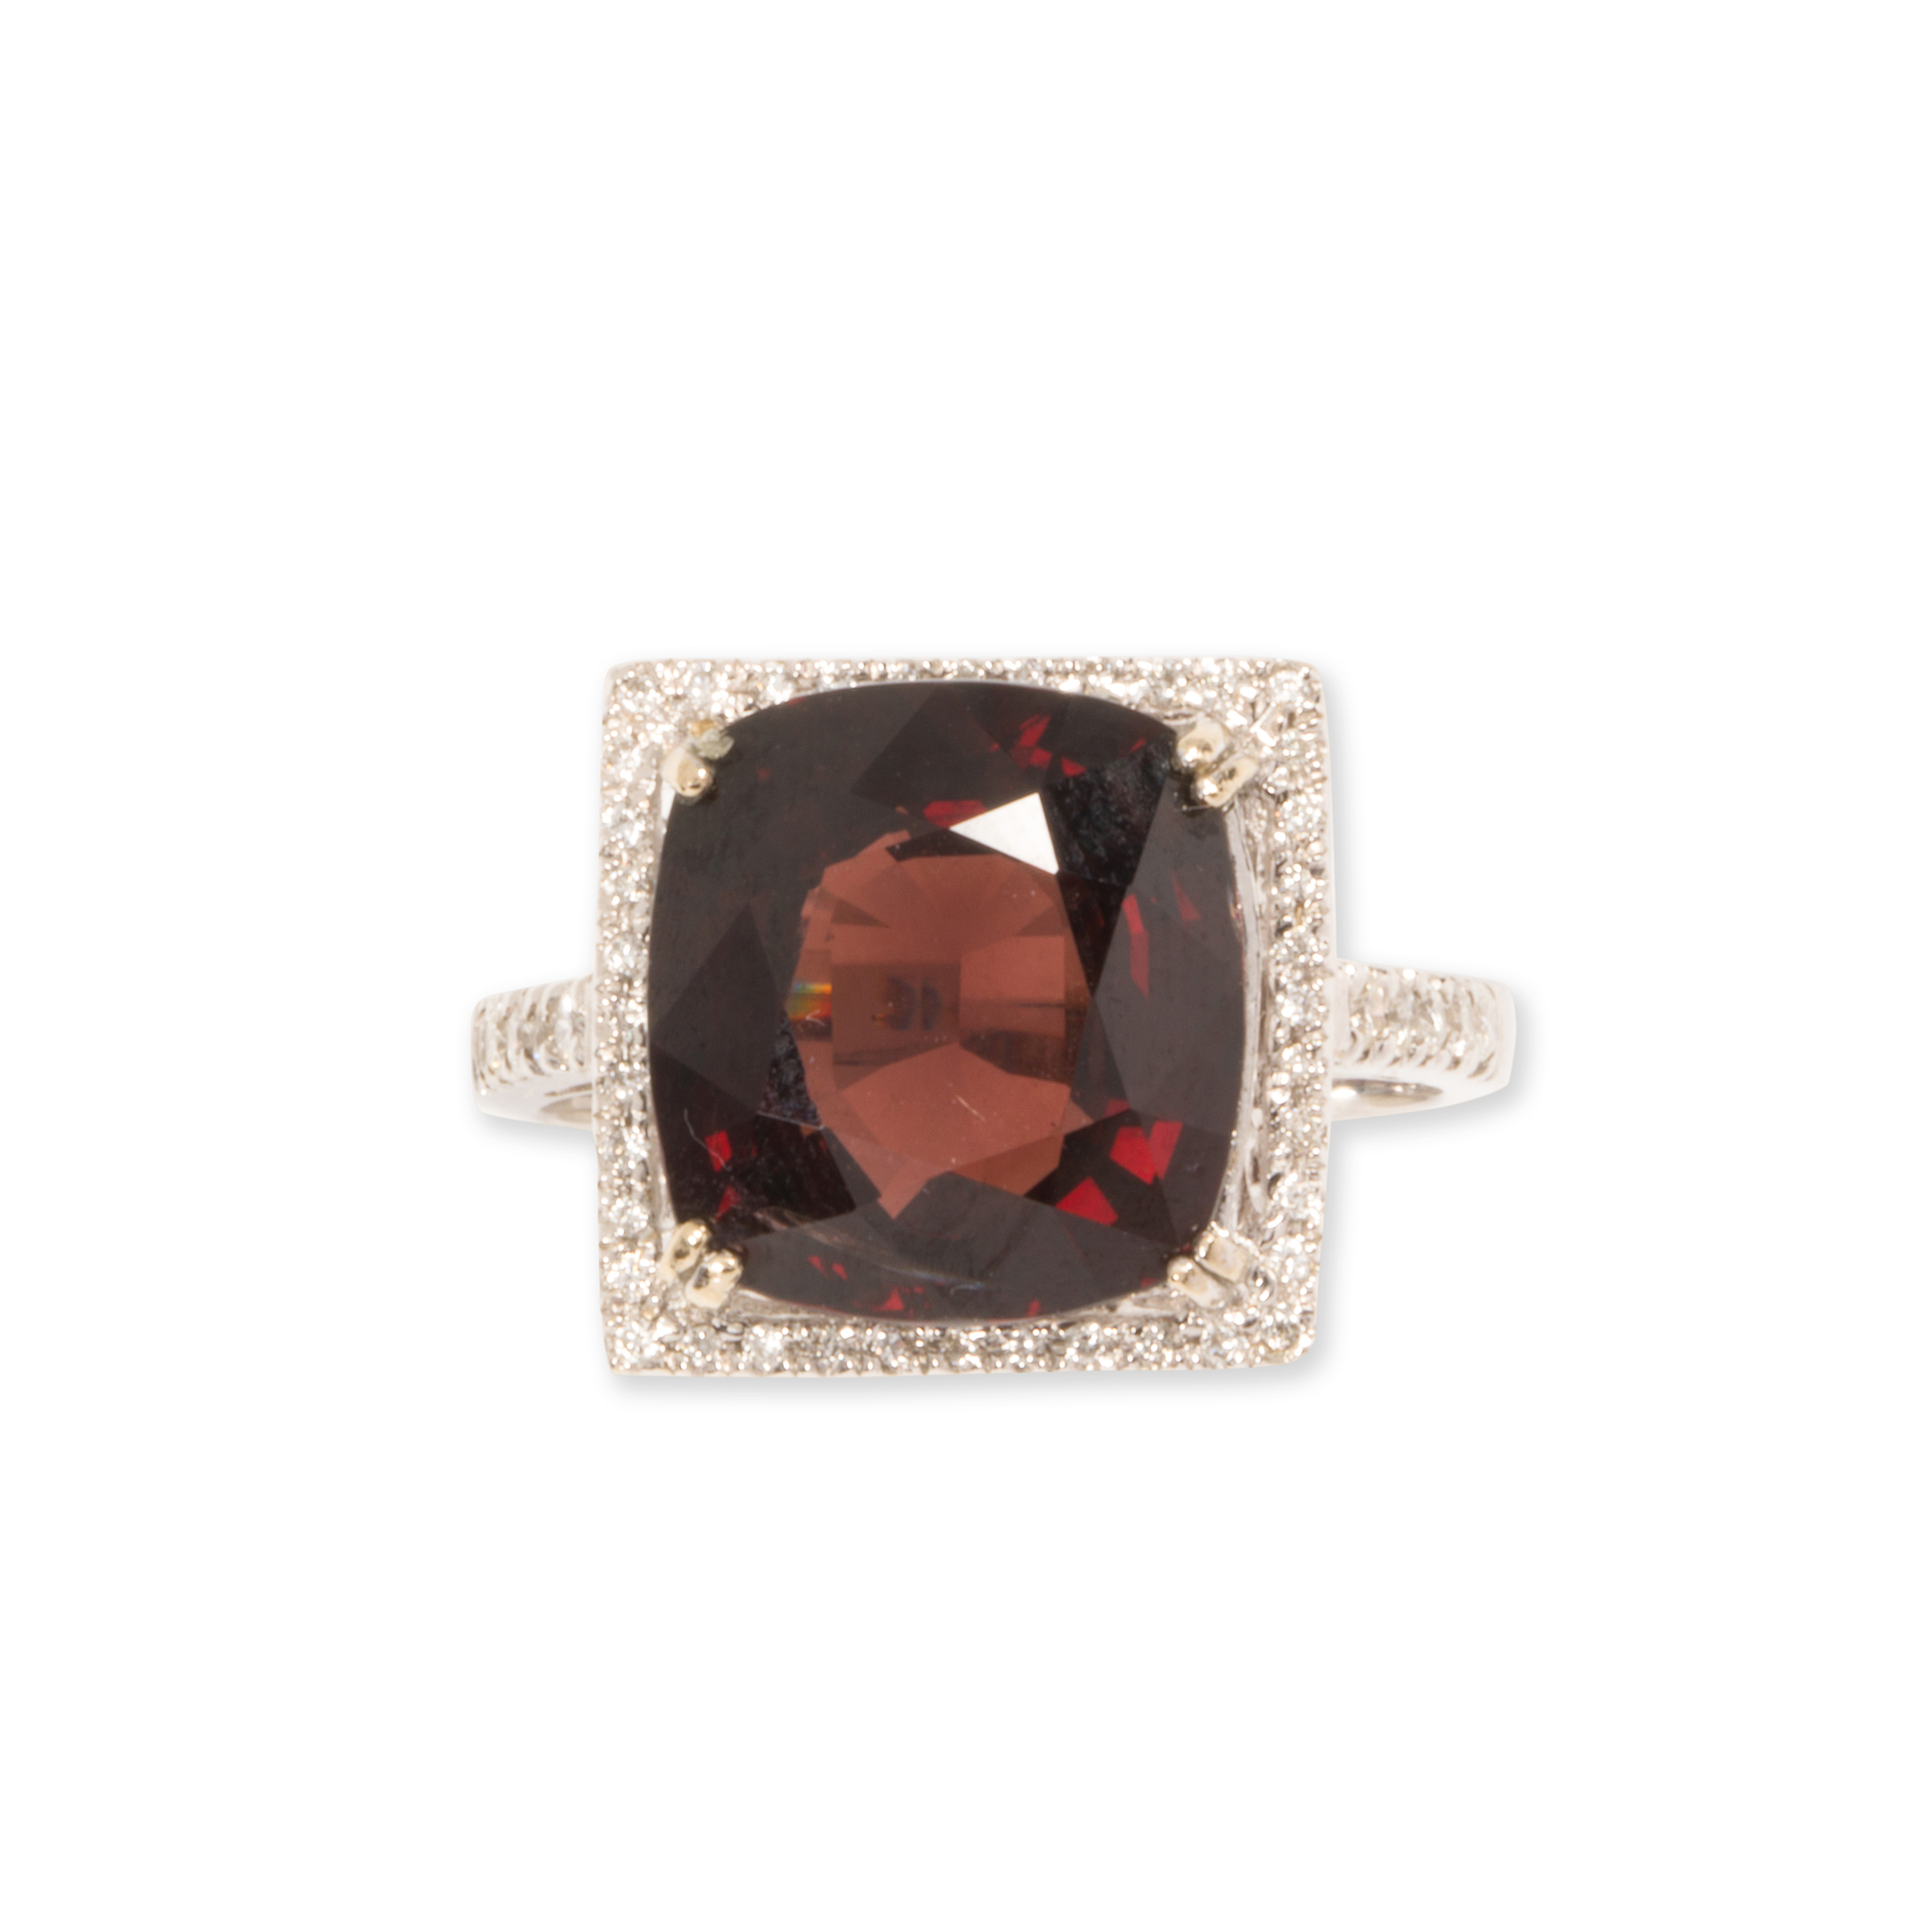 A RED SPINEL DIAMOND AND EIGHTEEN 3a541b